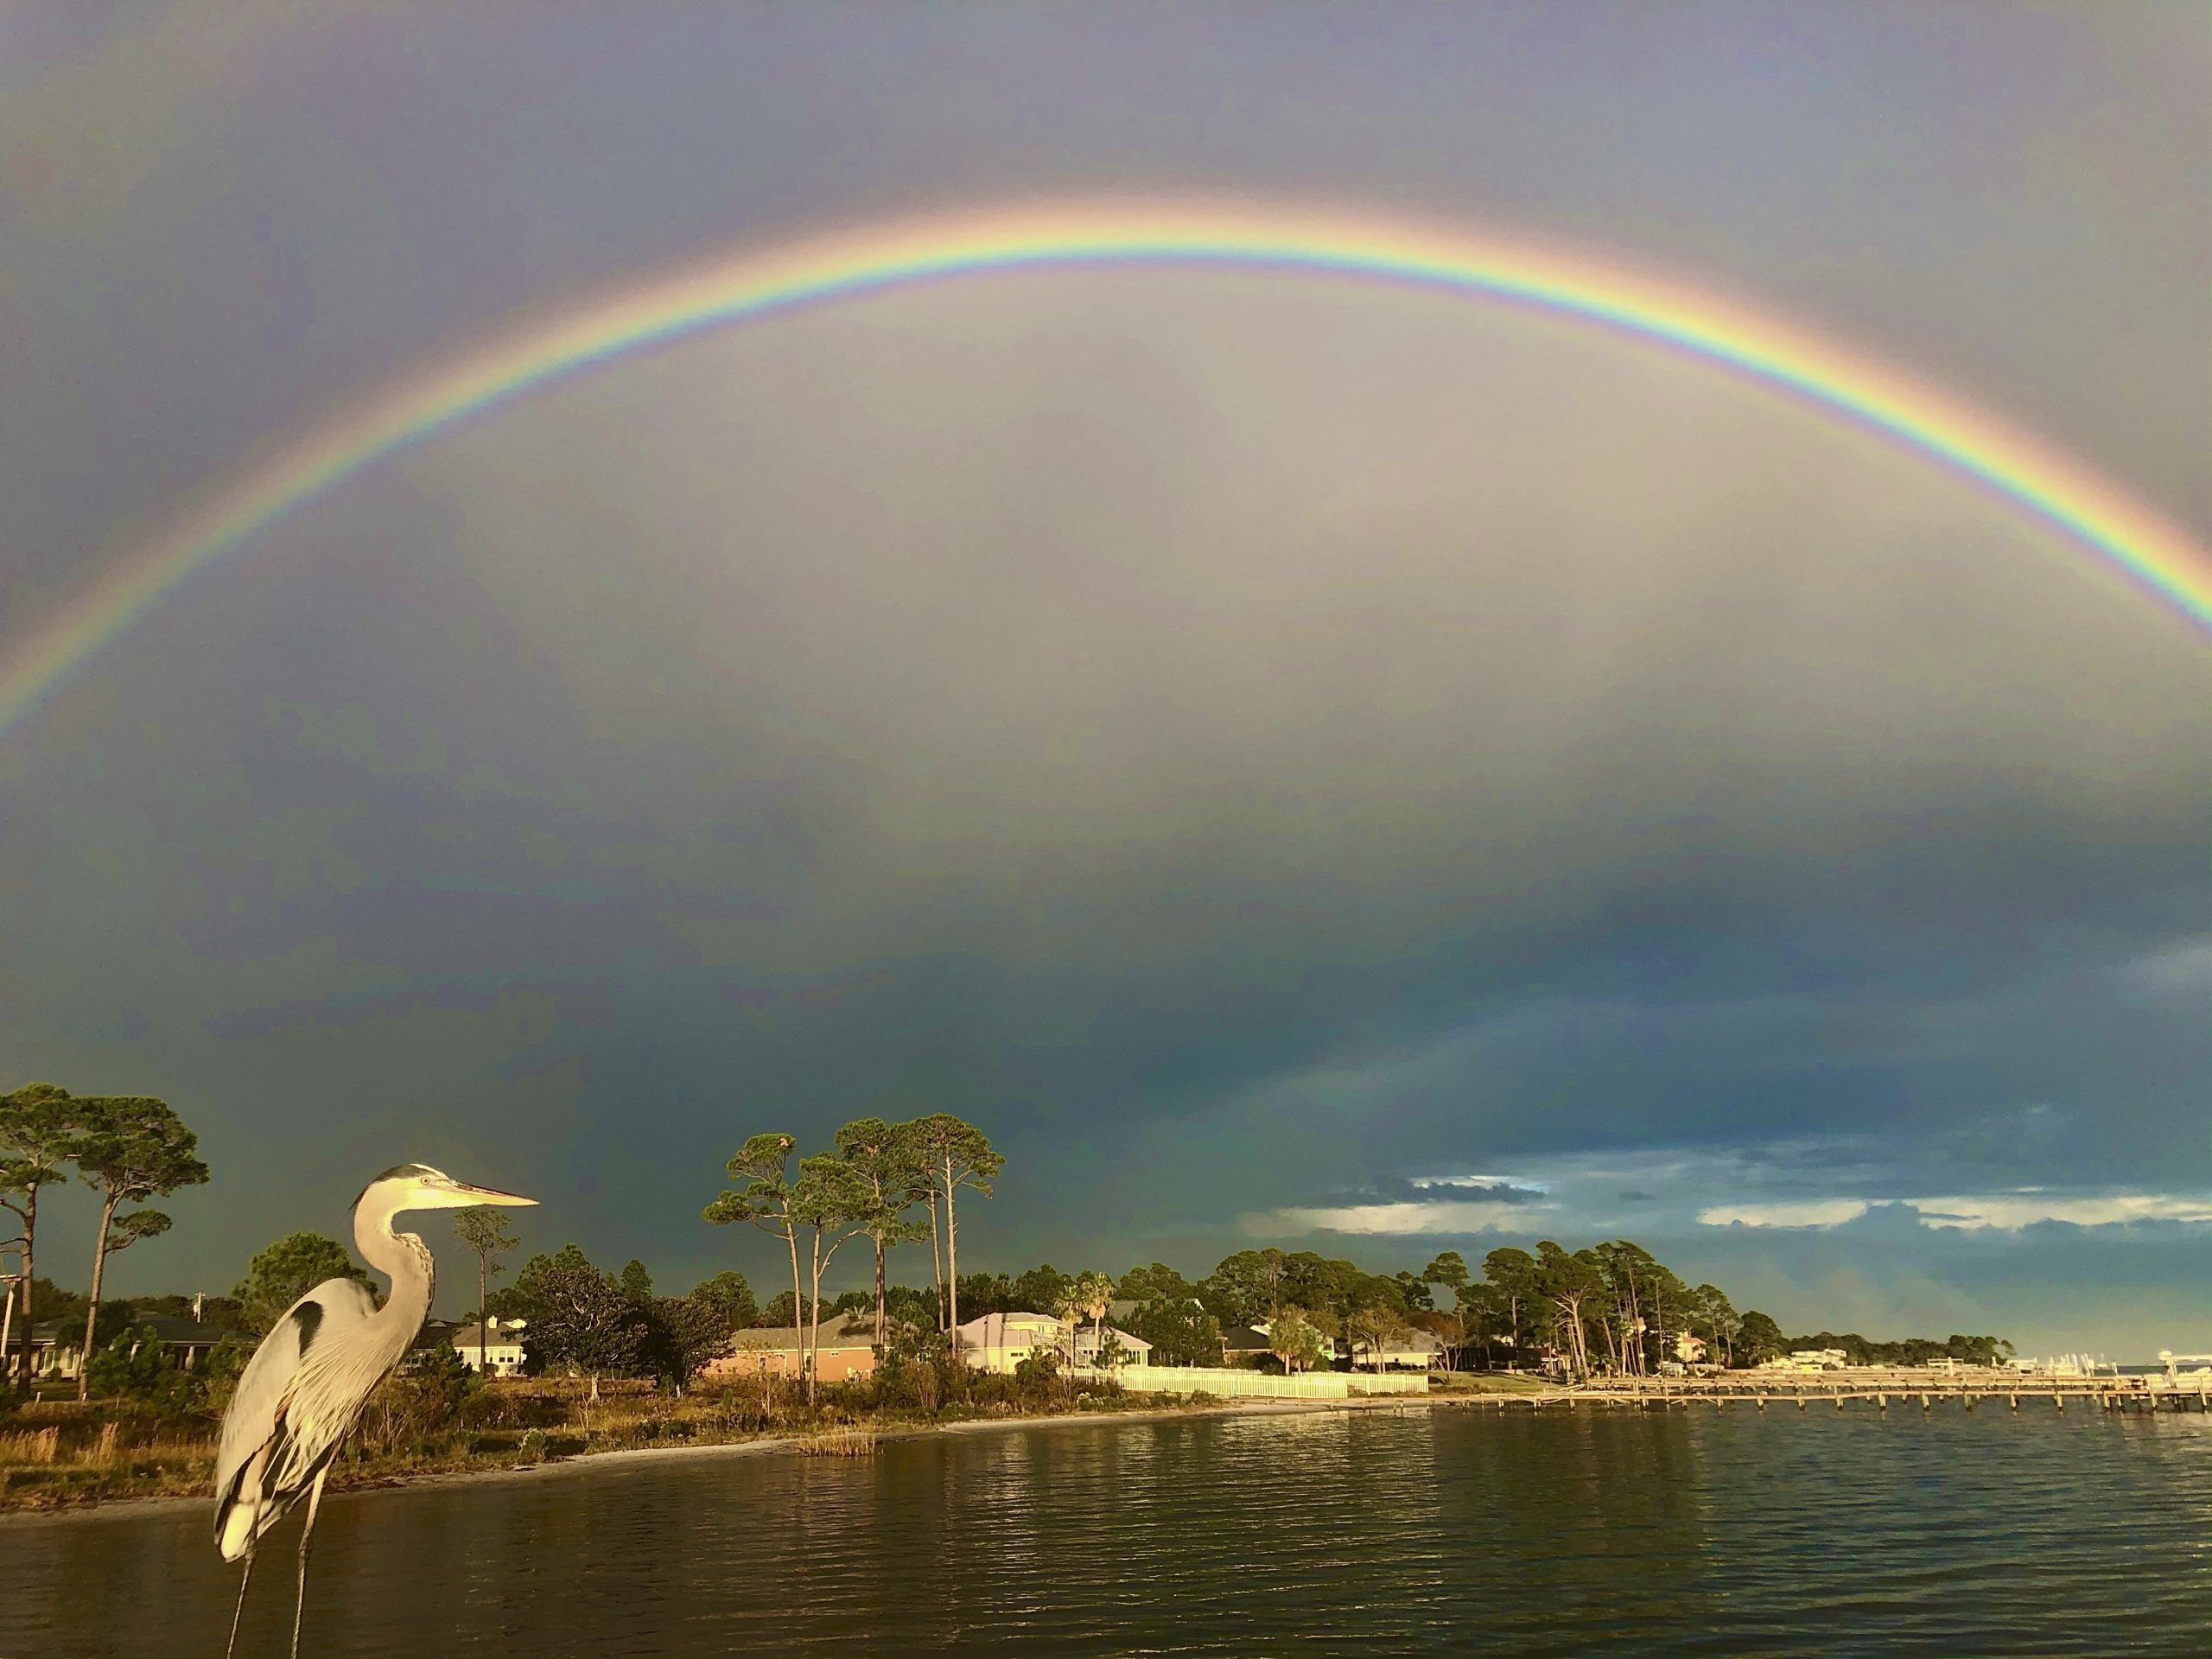 Today's Photo of the Day comes from Daniel Juarez Jr. Daniel got a two-for-one special with this rainbow and heron combination. The photo was taken at the Holley by the Sea Recreational Center pier. 🌈